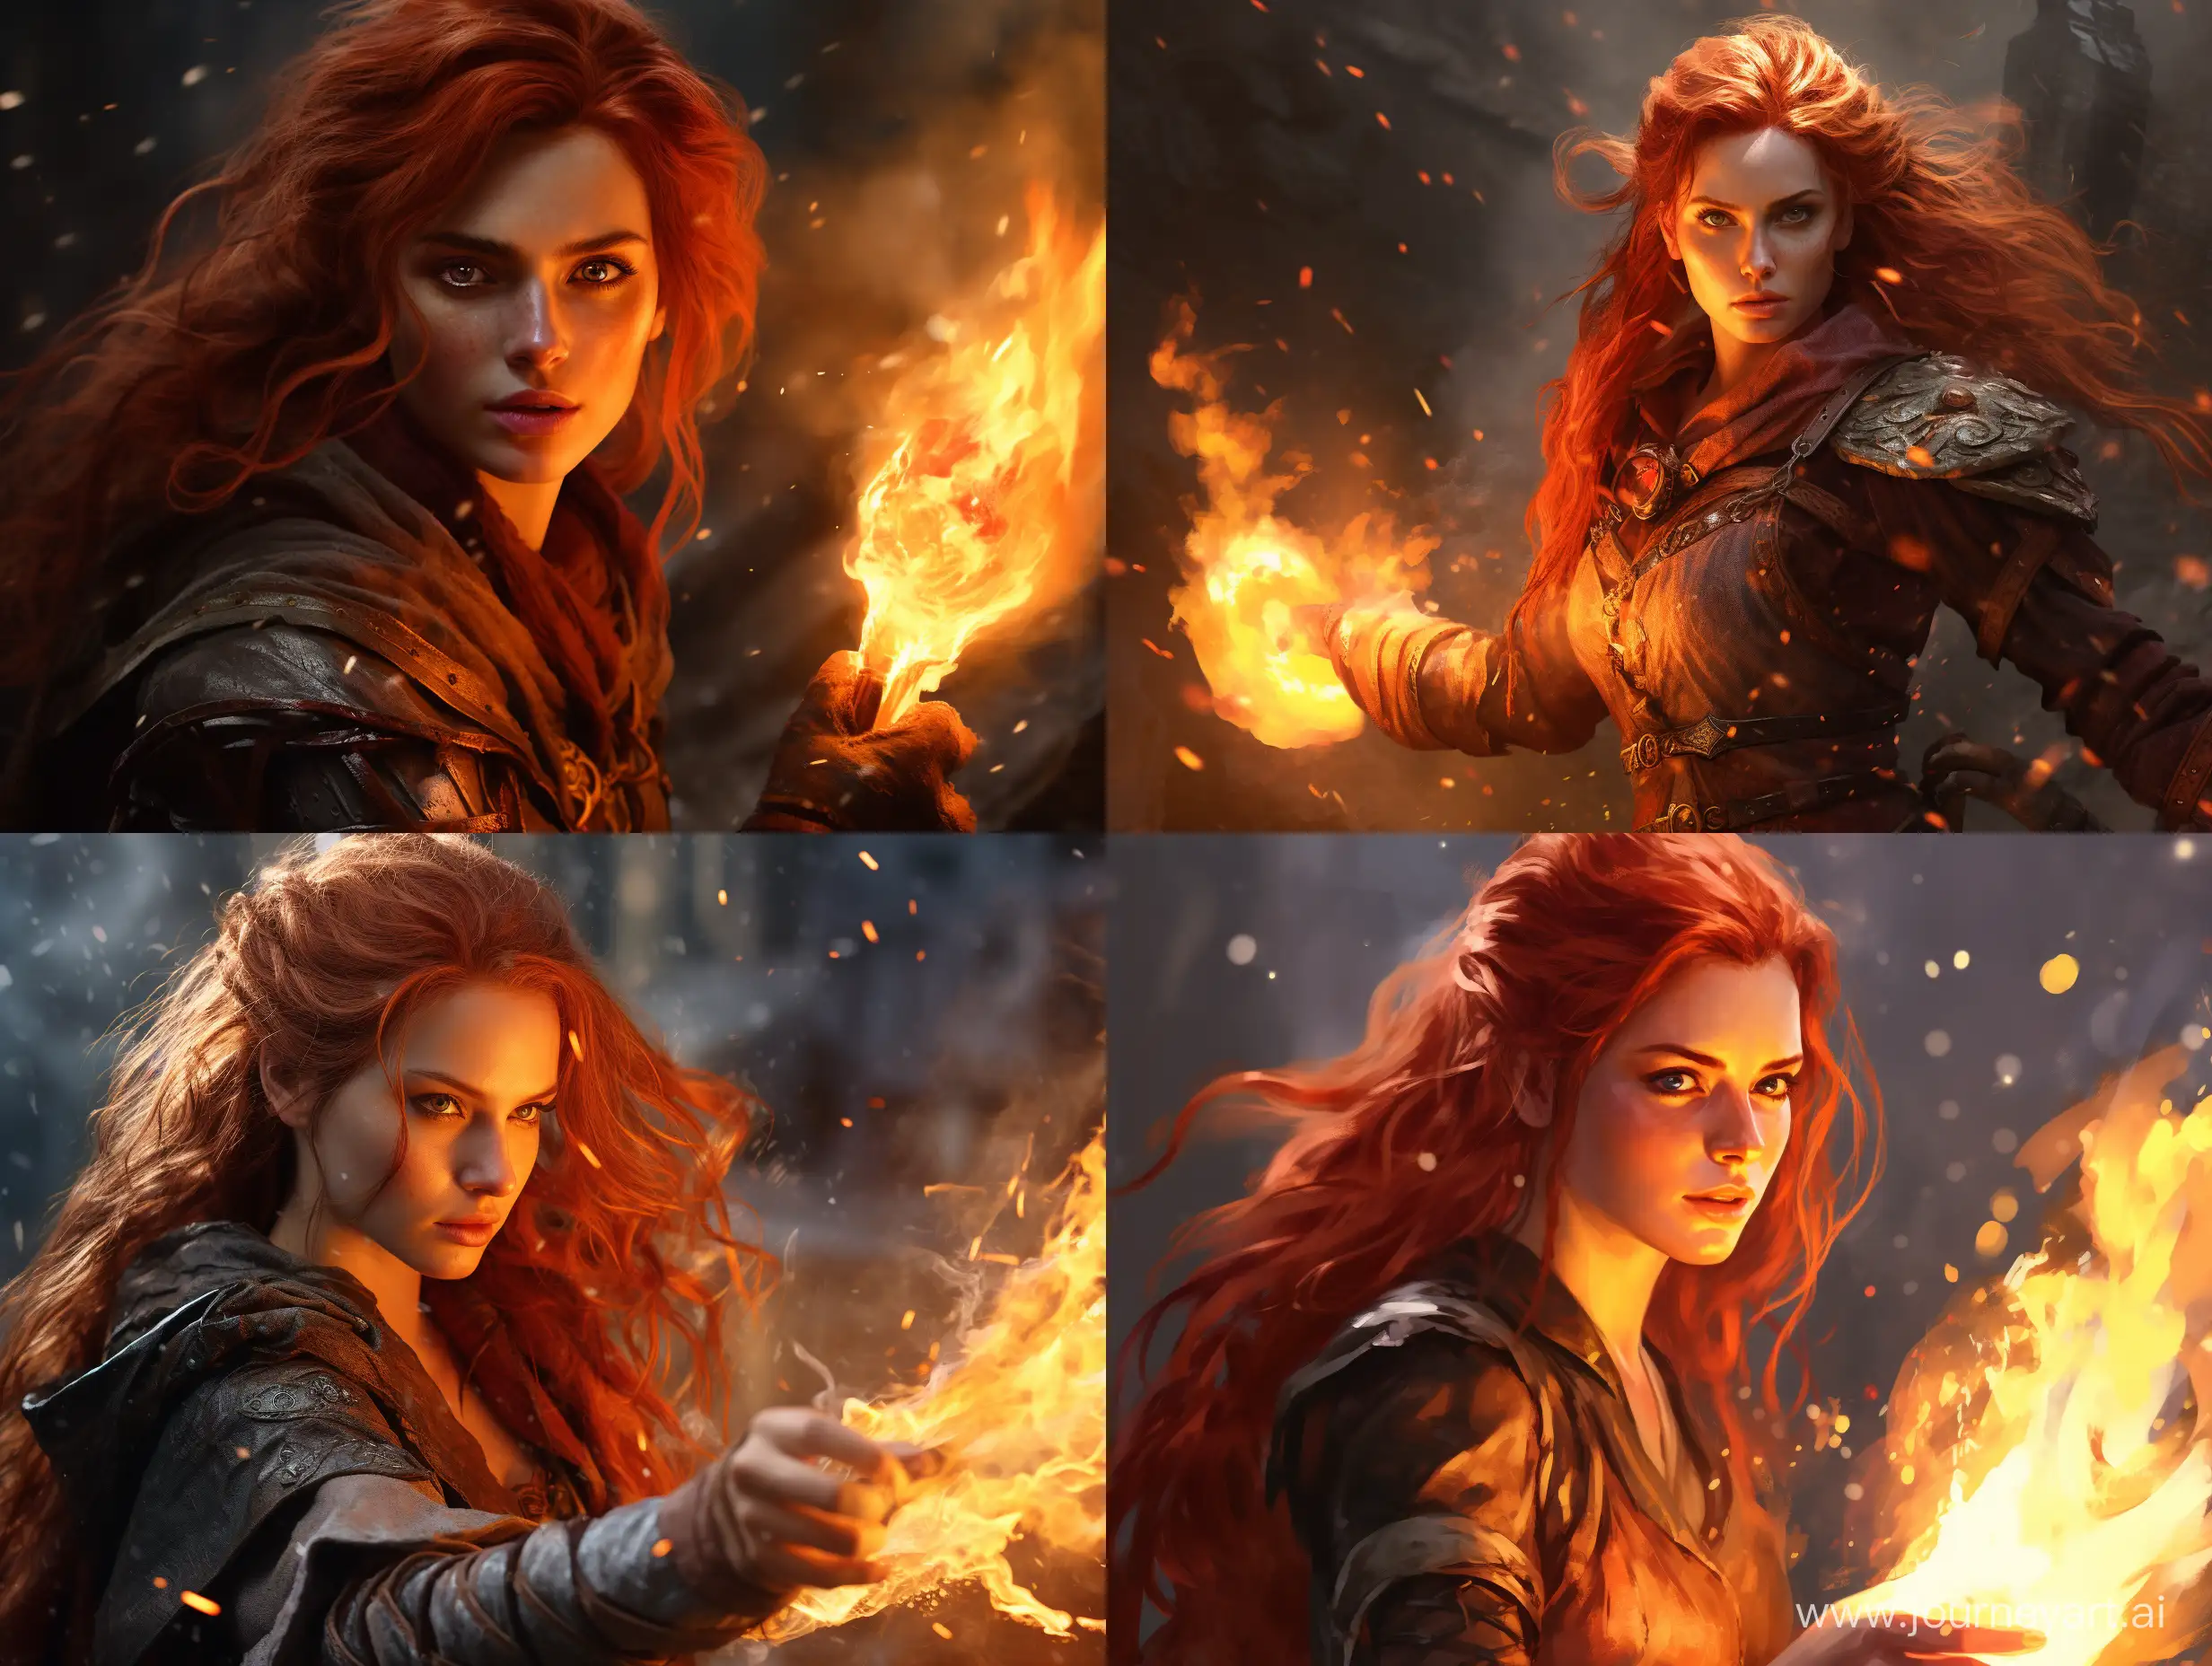 Redheaded-Female-Sorcerer-Conjuring-Flames-in-Dungeons-Dragons-Scene